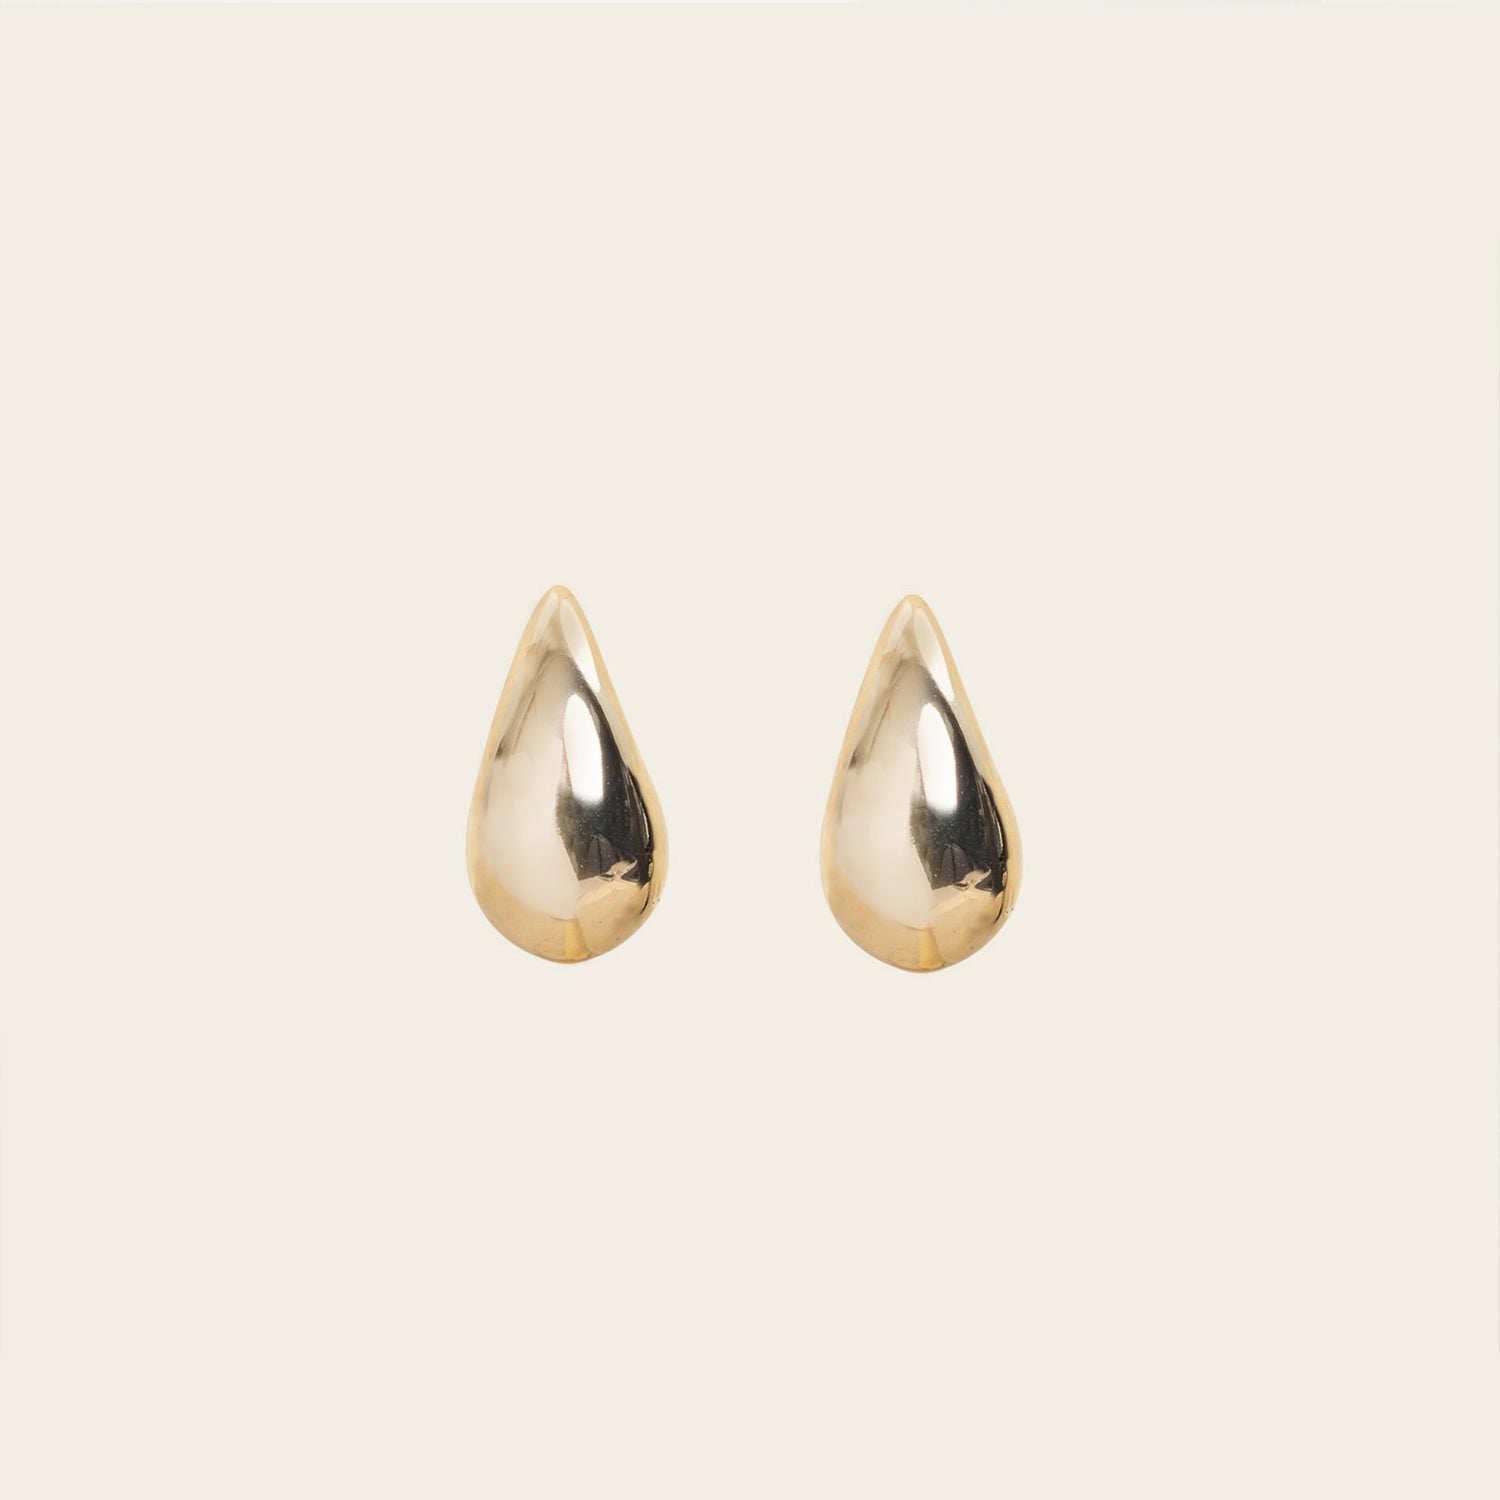 Image of the Isla Clip On Earrings in Gold feature a secure screwback closure that fits all ear types, providing an average comfortable wear duration of 8 - 12 hours. The hold strength is strong and you can manually adjust the earrings to your ear size. Constructed of gold toned copper alloy, this item is a single pair.